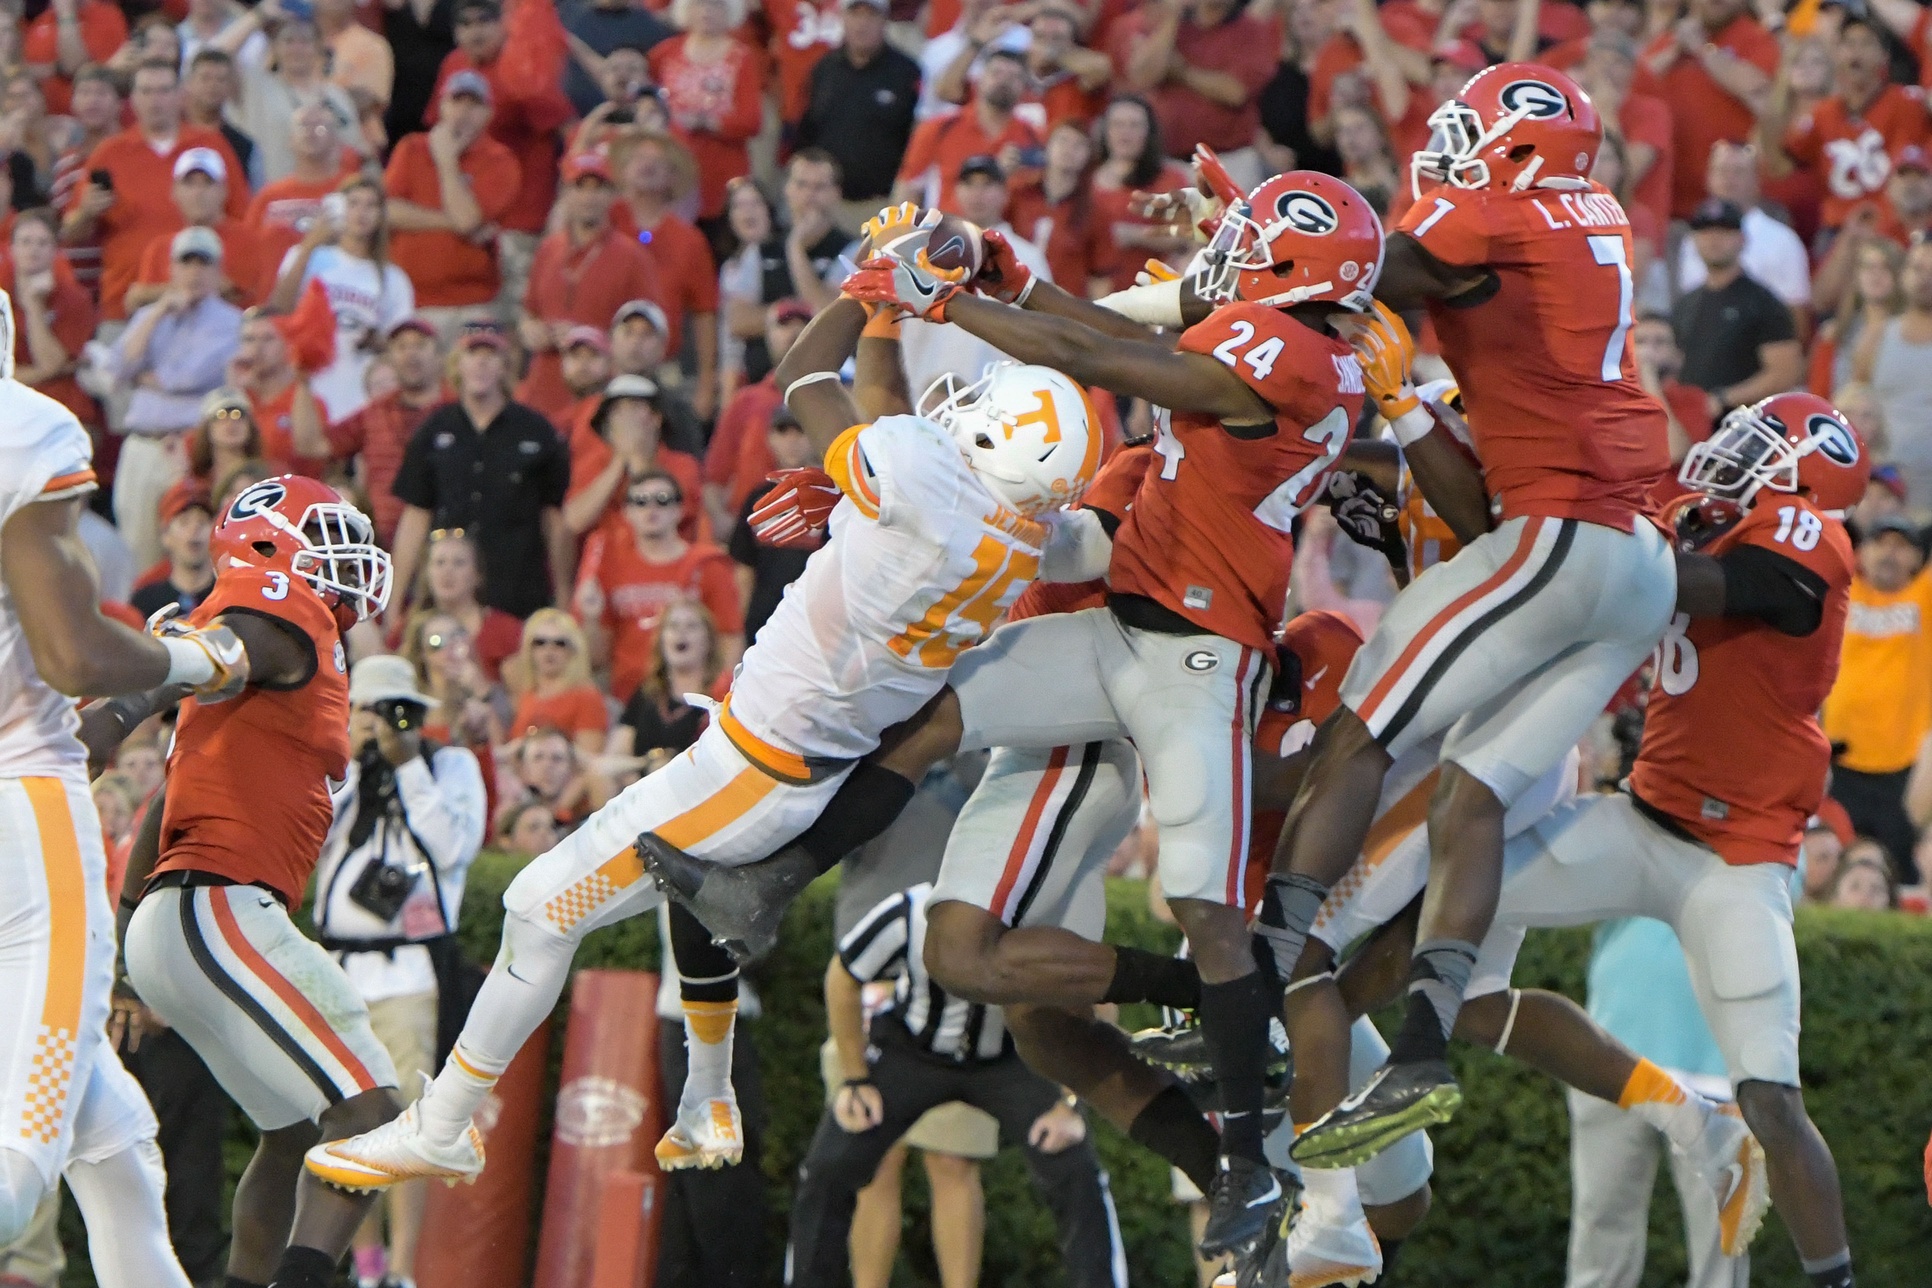 Oct 1, 2016; Athens, GA, USA; Tennessee Volunteers wide receiver Jauan Jennings (15) catches a game winning touchdown pass in front of Georgia Bulldogs safety Dominick Sanders (24) on the last play on the game during the fourth quarter at Sanford Stadium. Tennessee defeated Georgia 34-31. Mandatory Credit: Dale Zanine-USA TODAY Sports